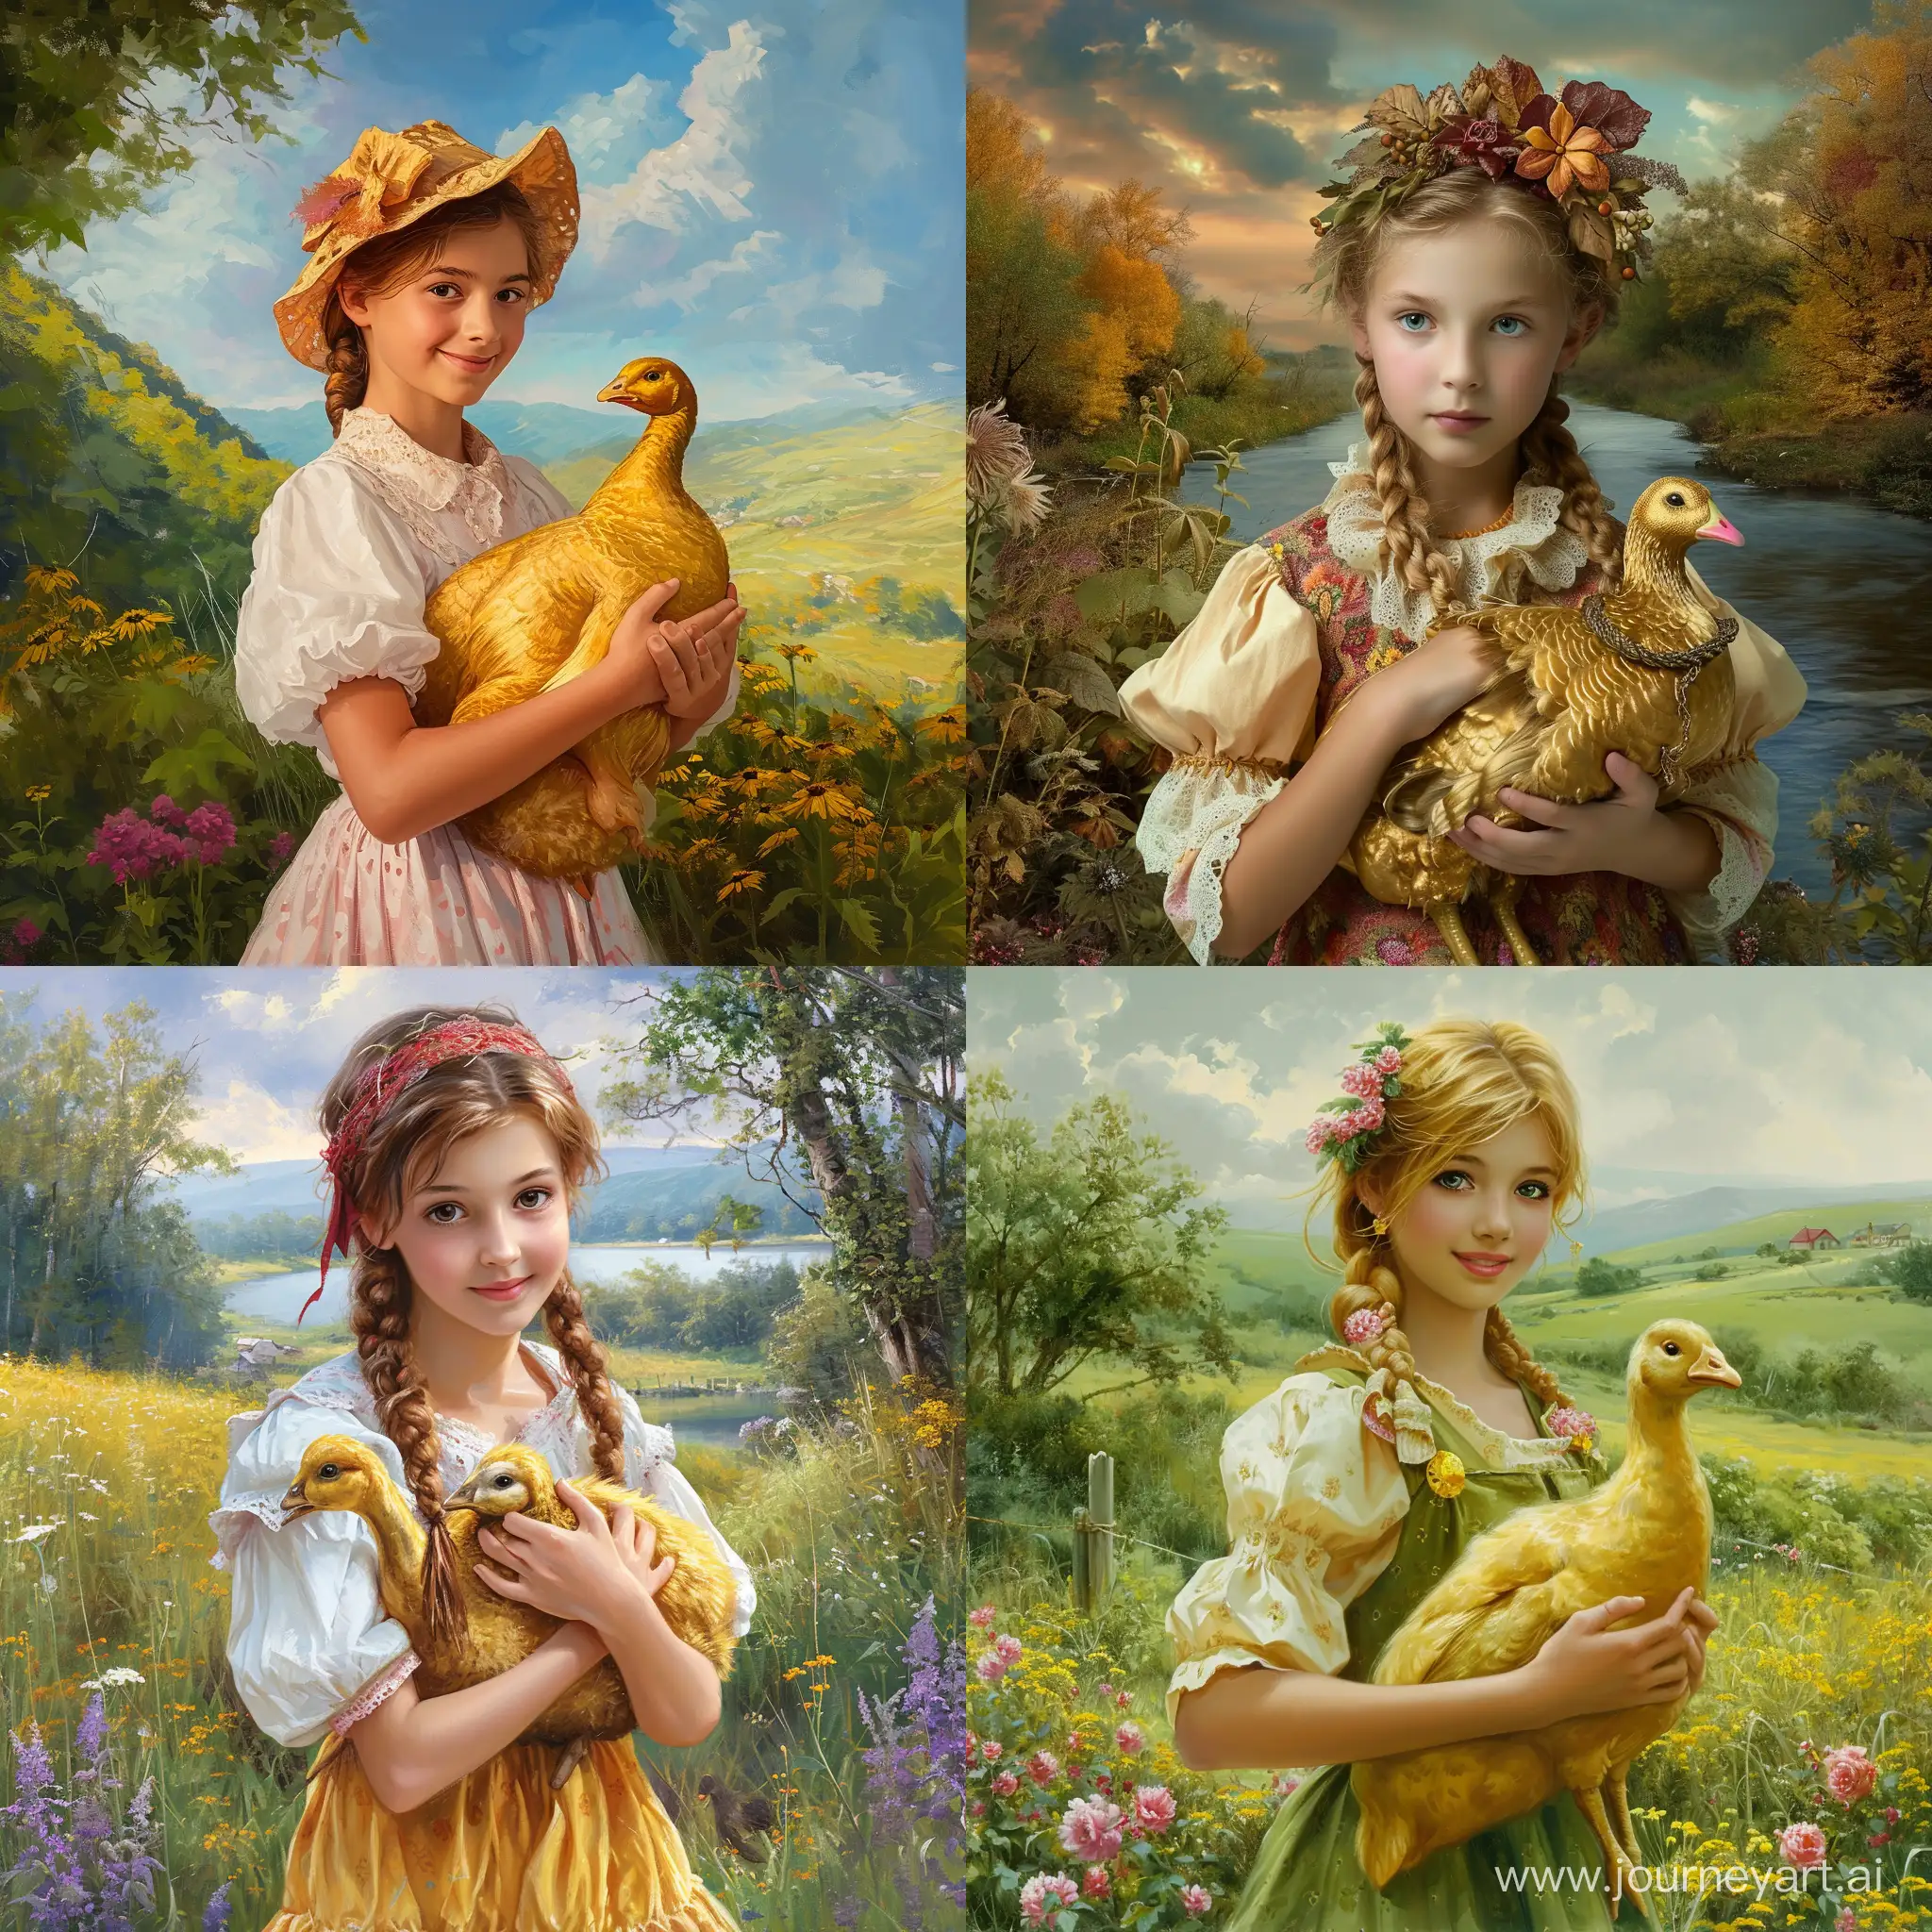 looks like painting or computer  graphic art Country Teenager Holding Golden Goose with nature background 